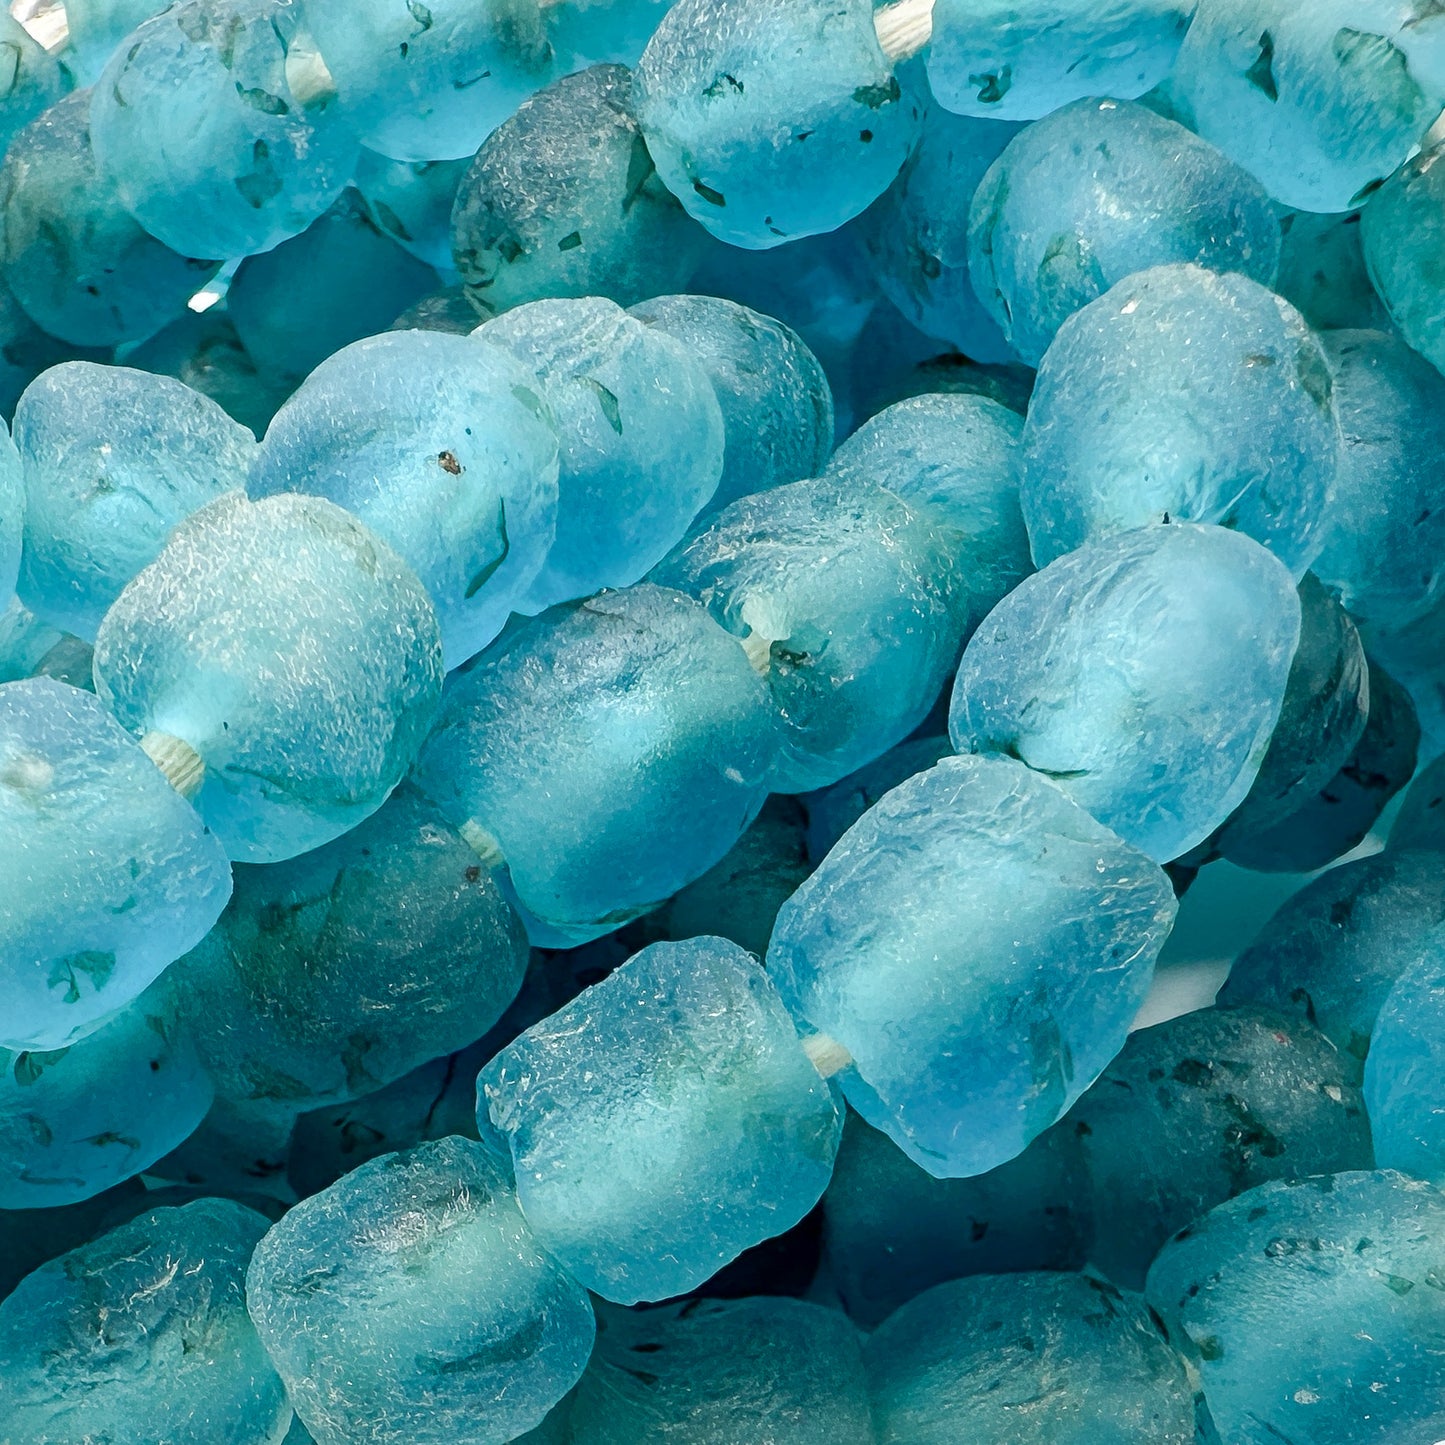 Smoky Aqua 10mm African Recycled Glass Bead (2 Quantities Available)-The Bead Gallery Honolulu